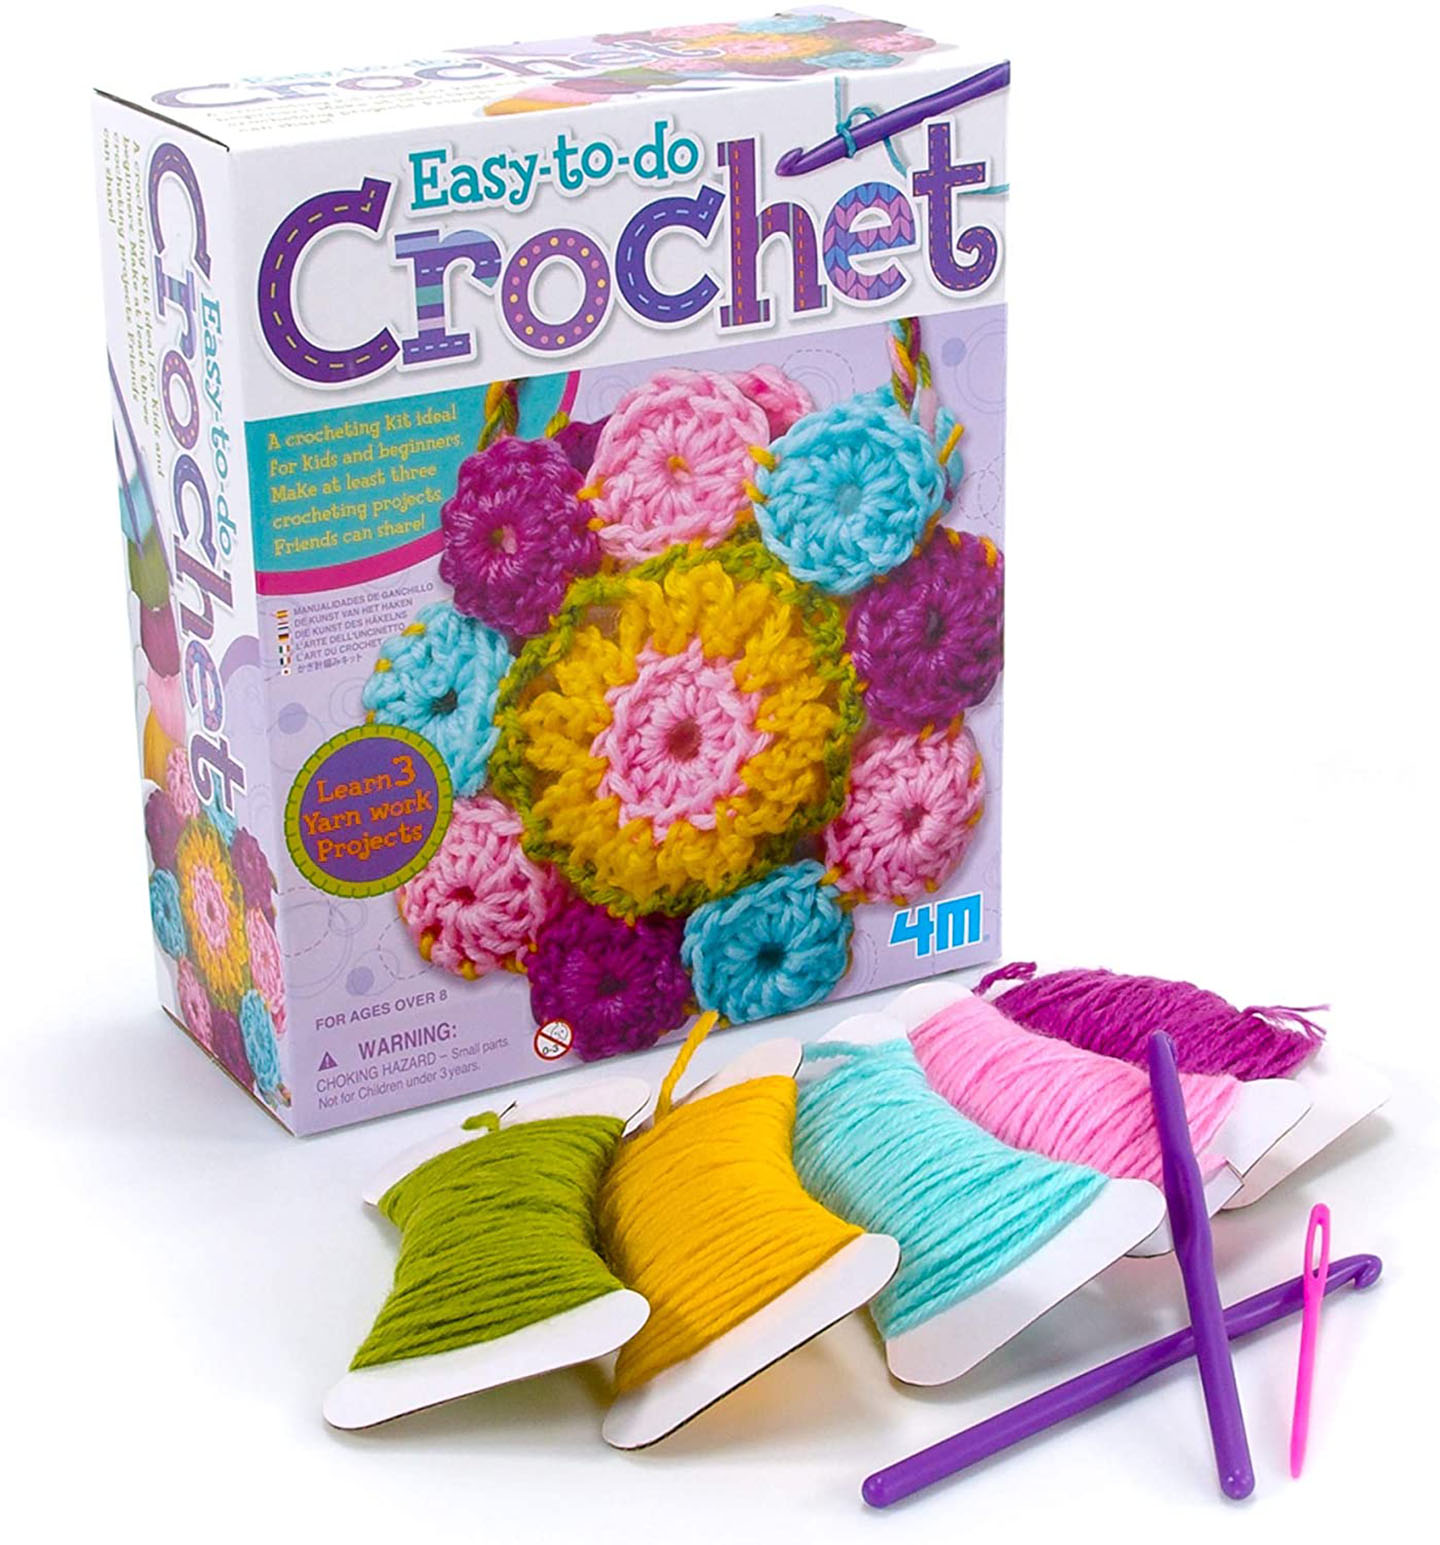 Huntington Home Crochet Gifts & Mini Makes for Beg., makes 8 projects, new